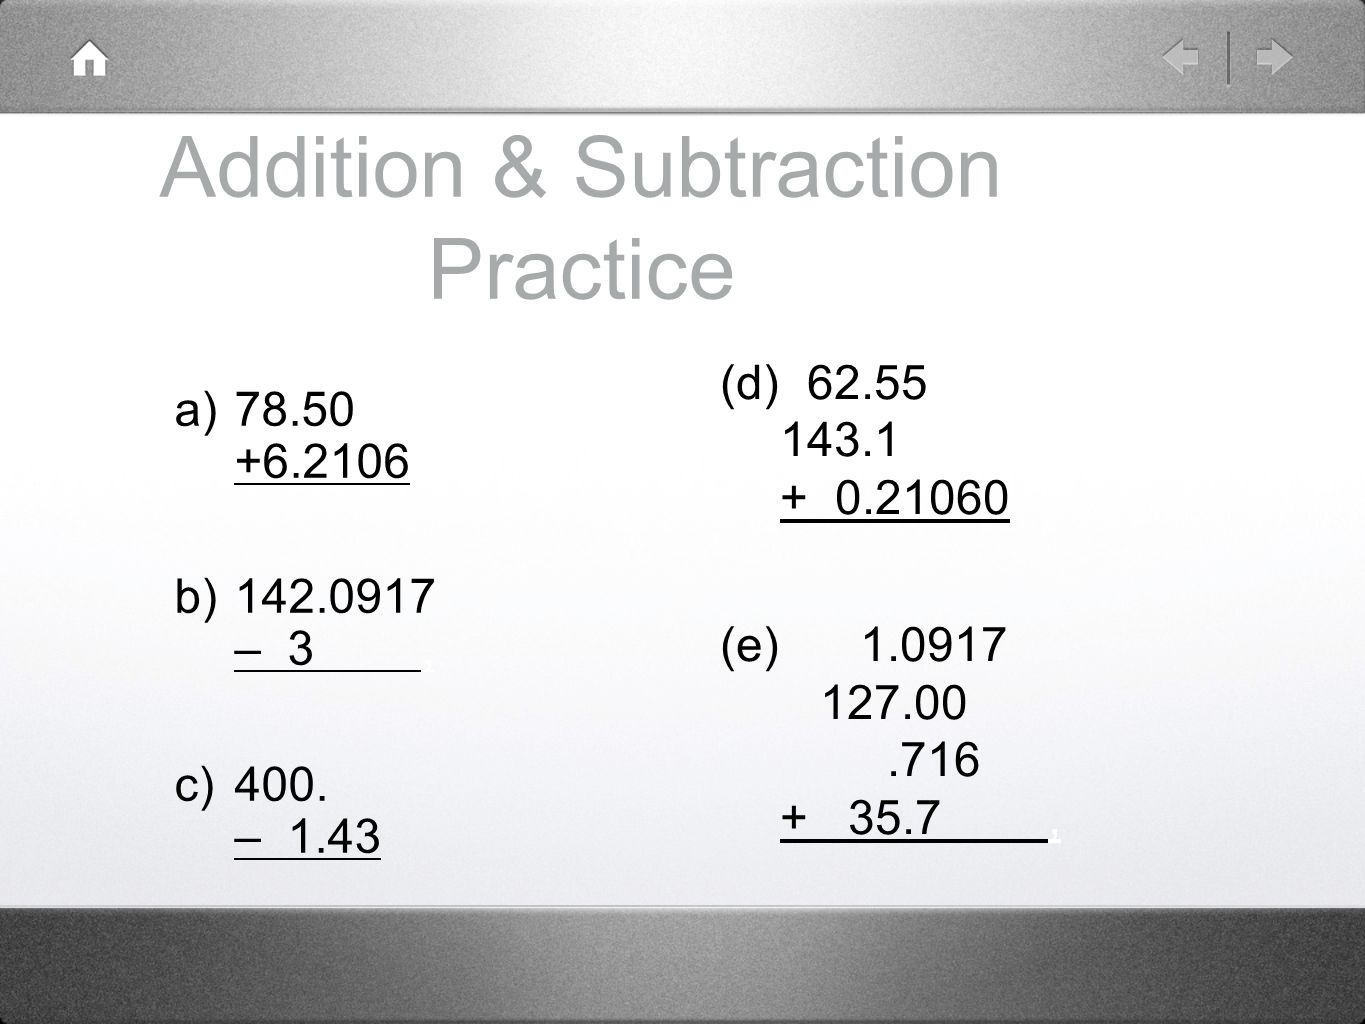 Addition & Subtraction Practice